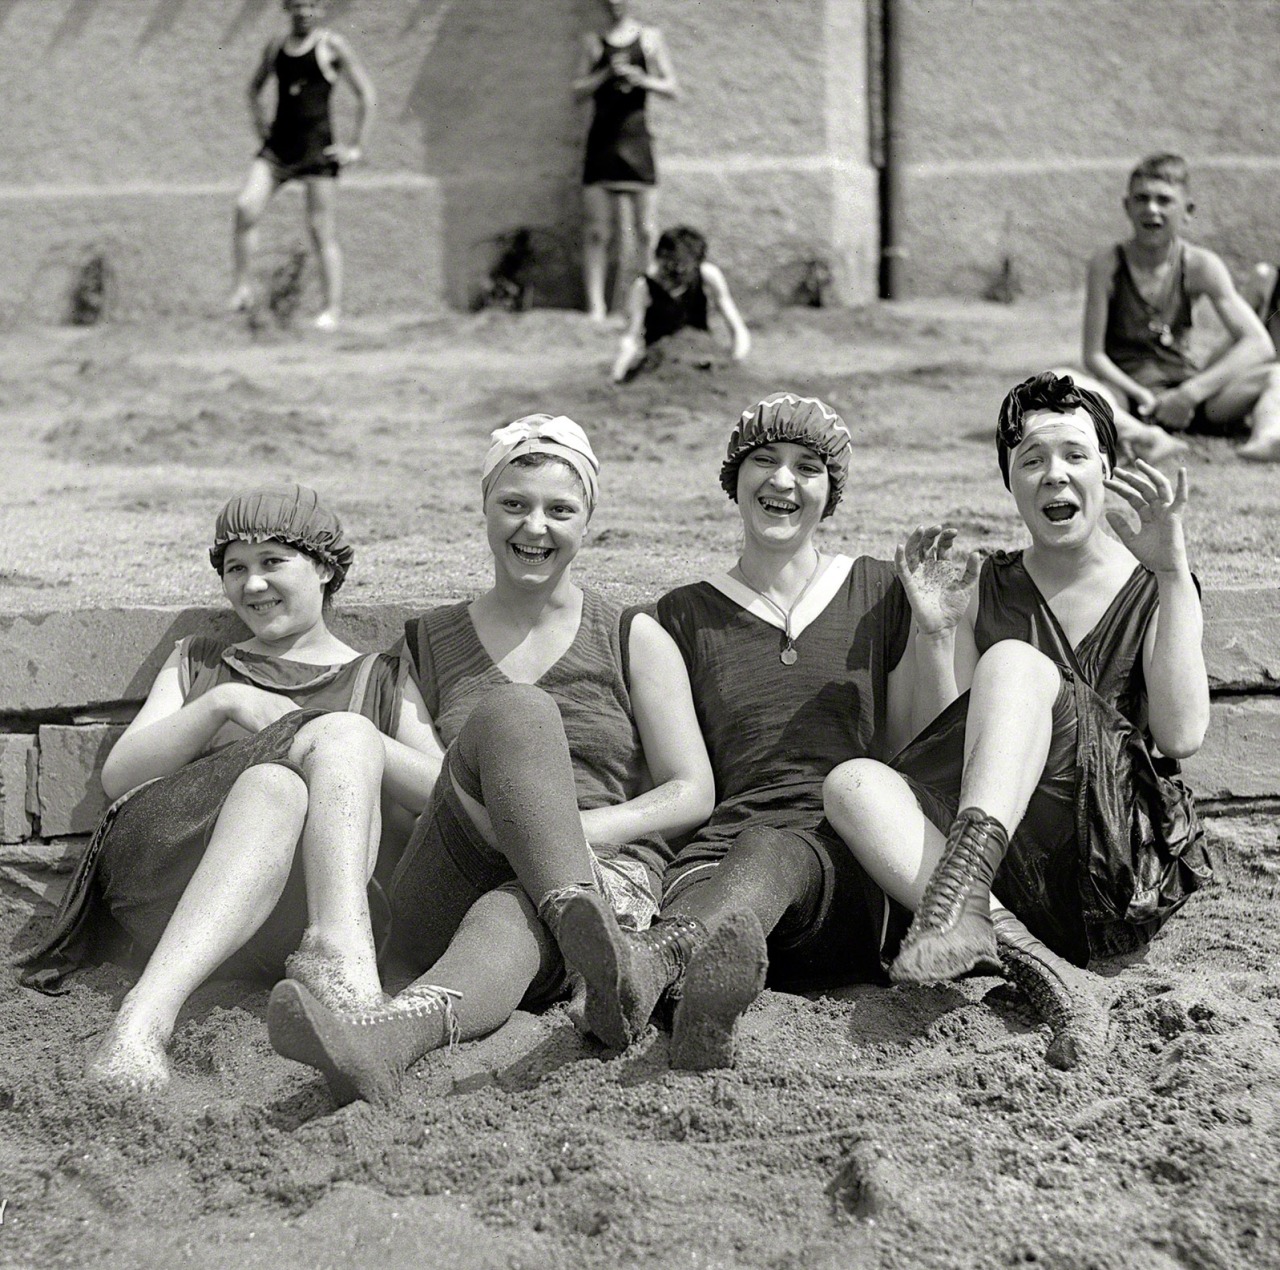 (via Candid Camera: 1920 [detail] | Shorpy Historical Photo Archive)